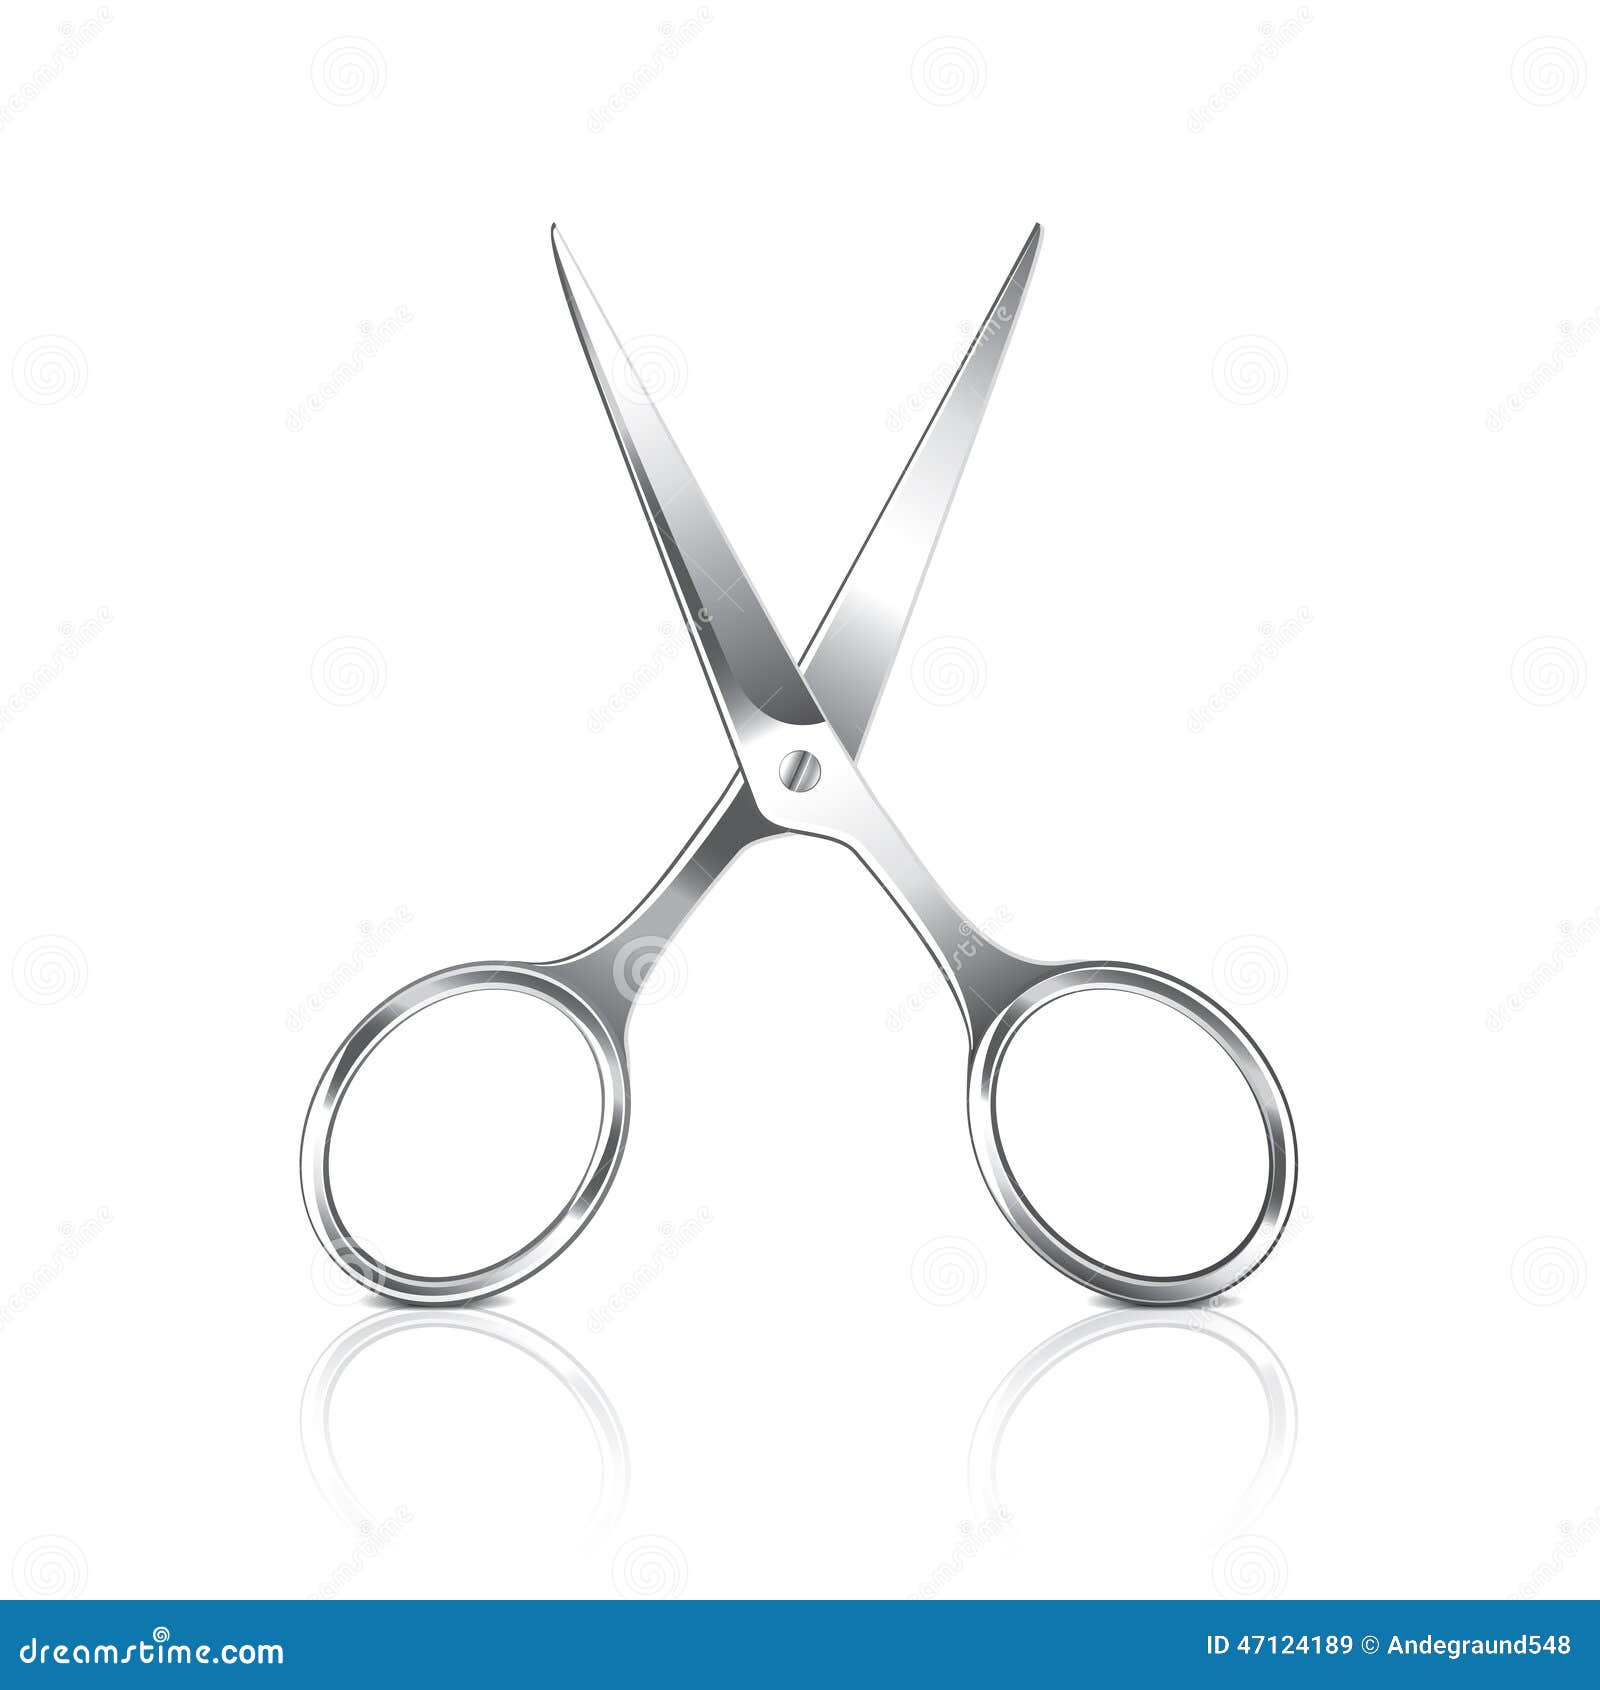 Metal scissors with blue handles.Sewing or tailoring tools kit